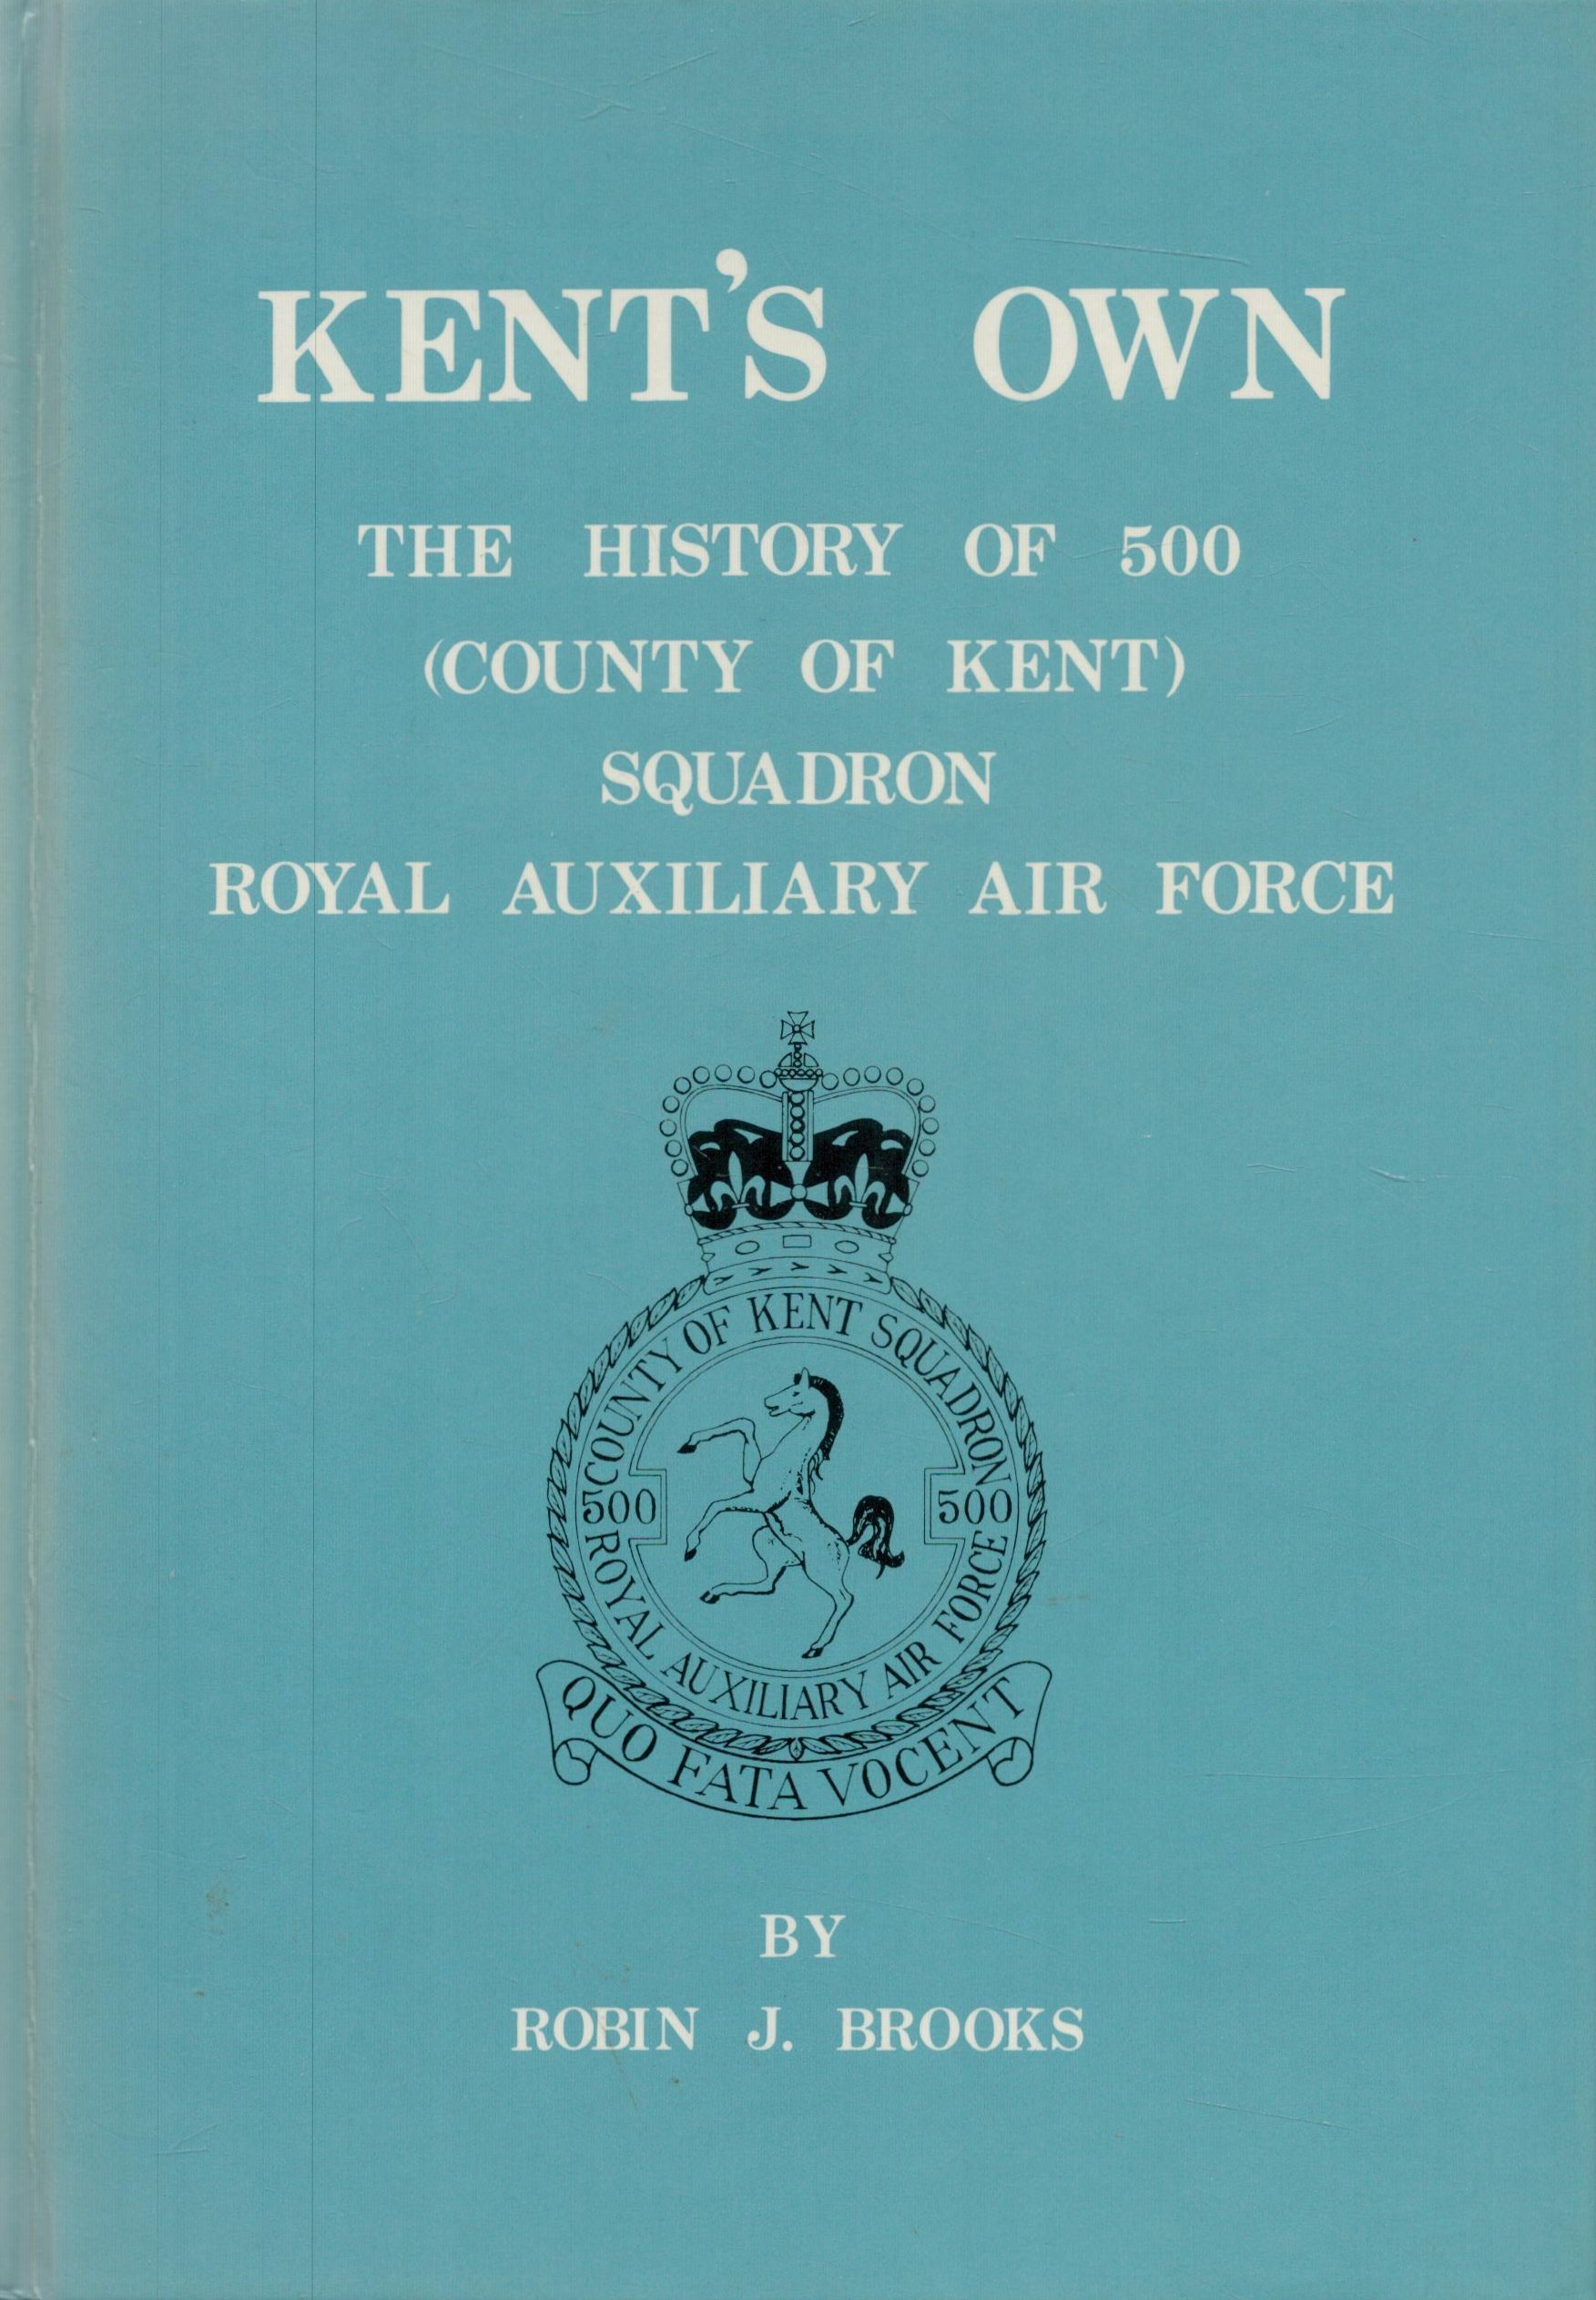 Robin J Brooks Multi Signed Book titled 'Kents Own' Good conditions Est. Good condition. All